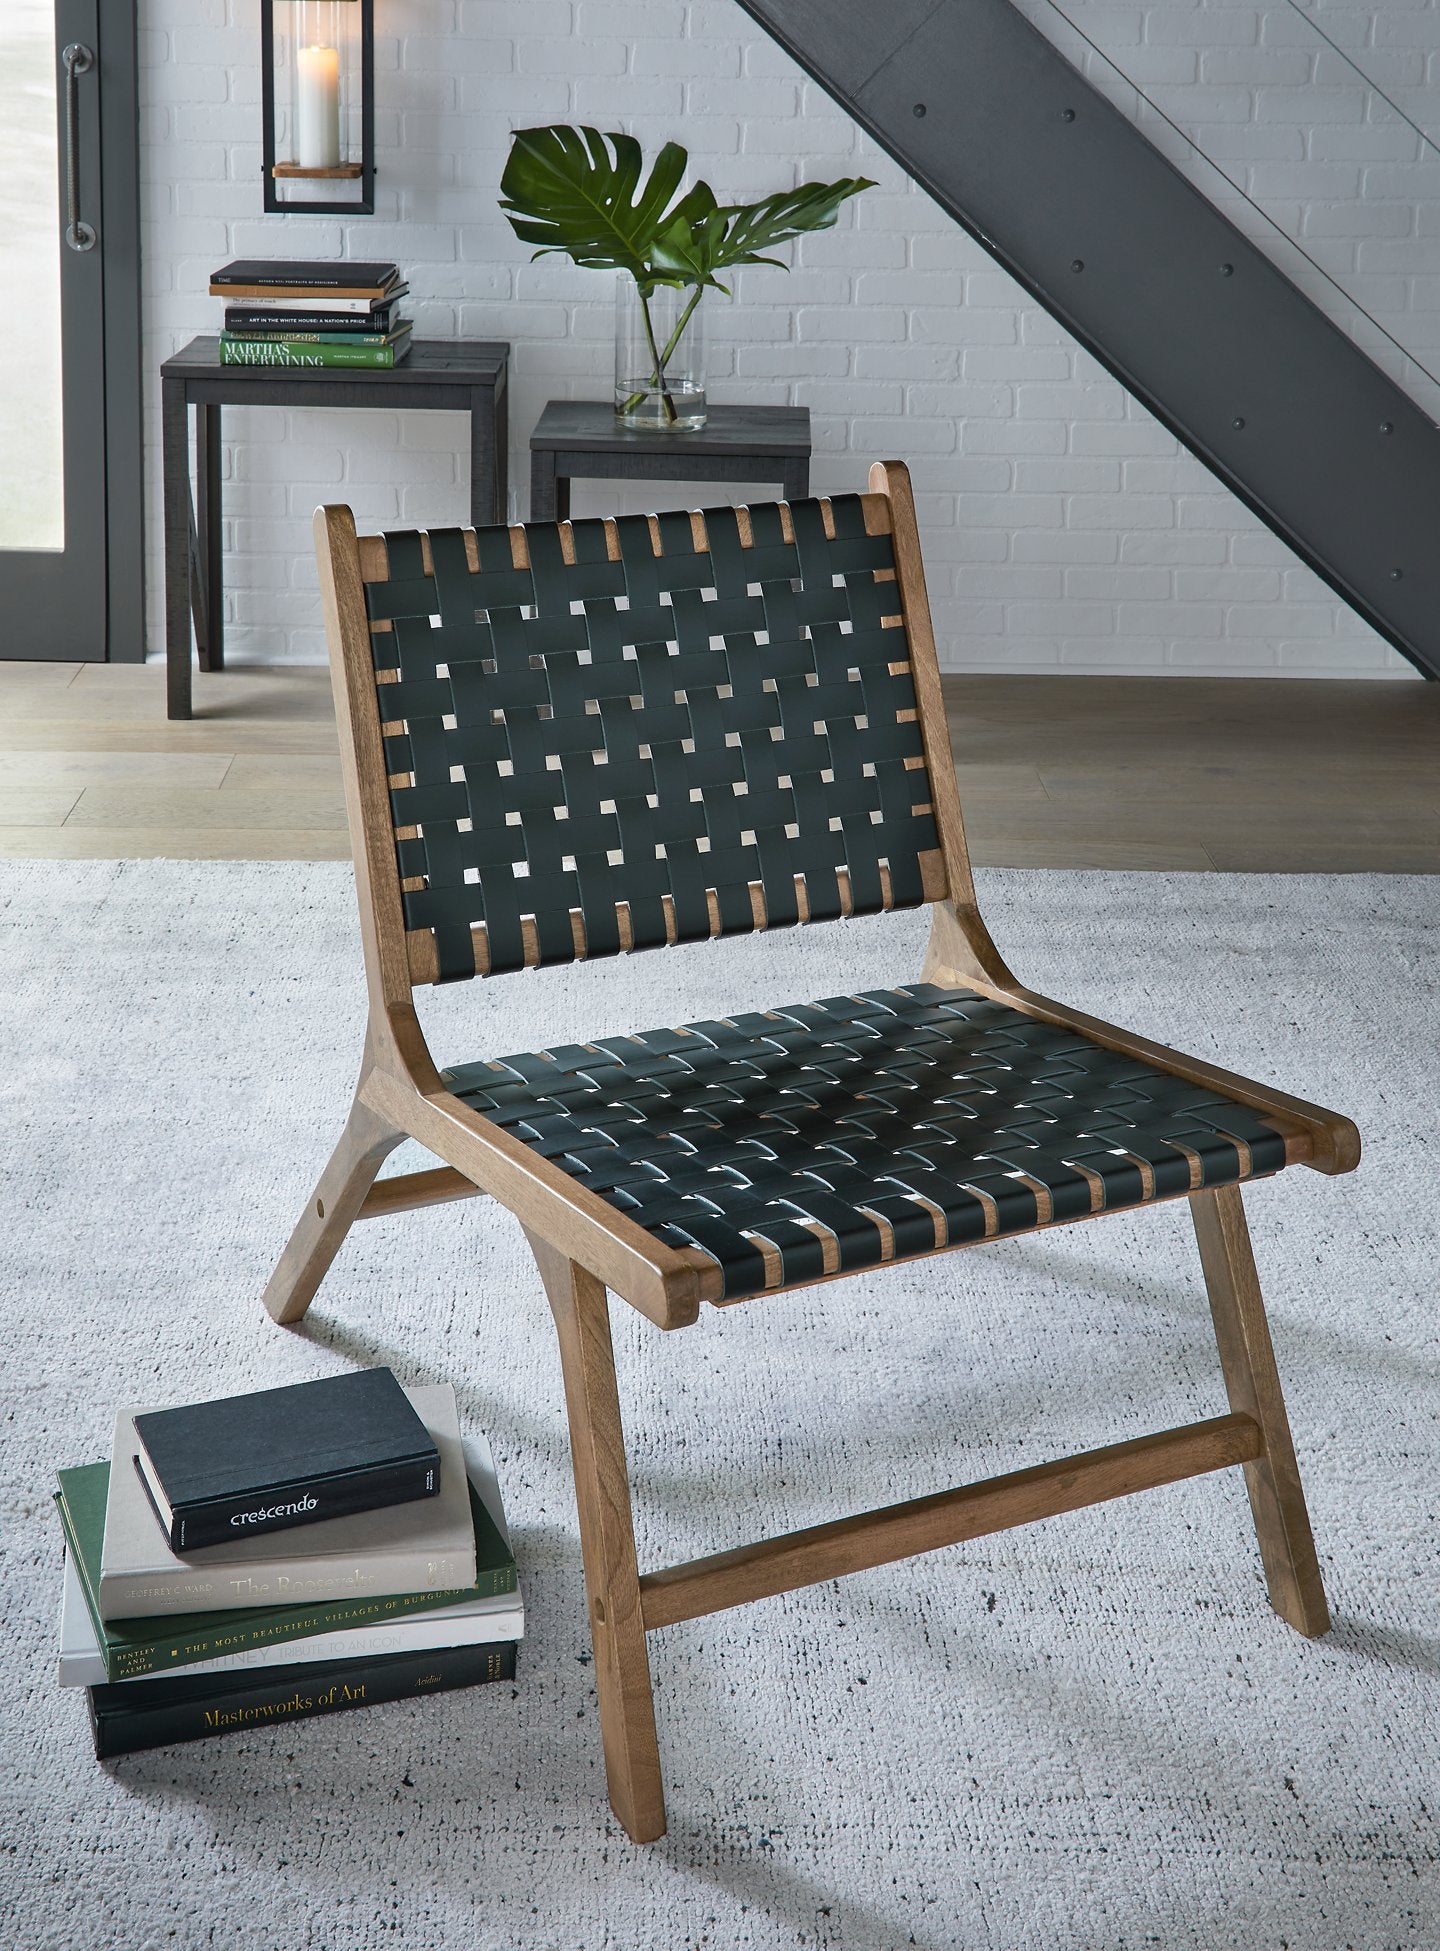 Fayme Accent Chair - Half Price Furniture